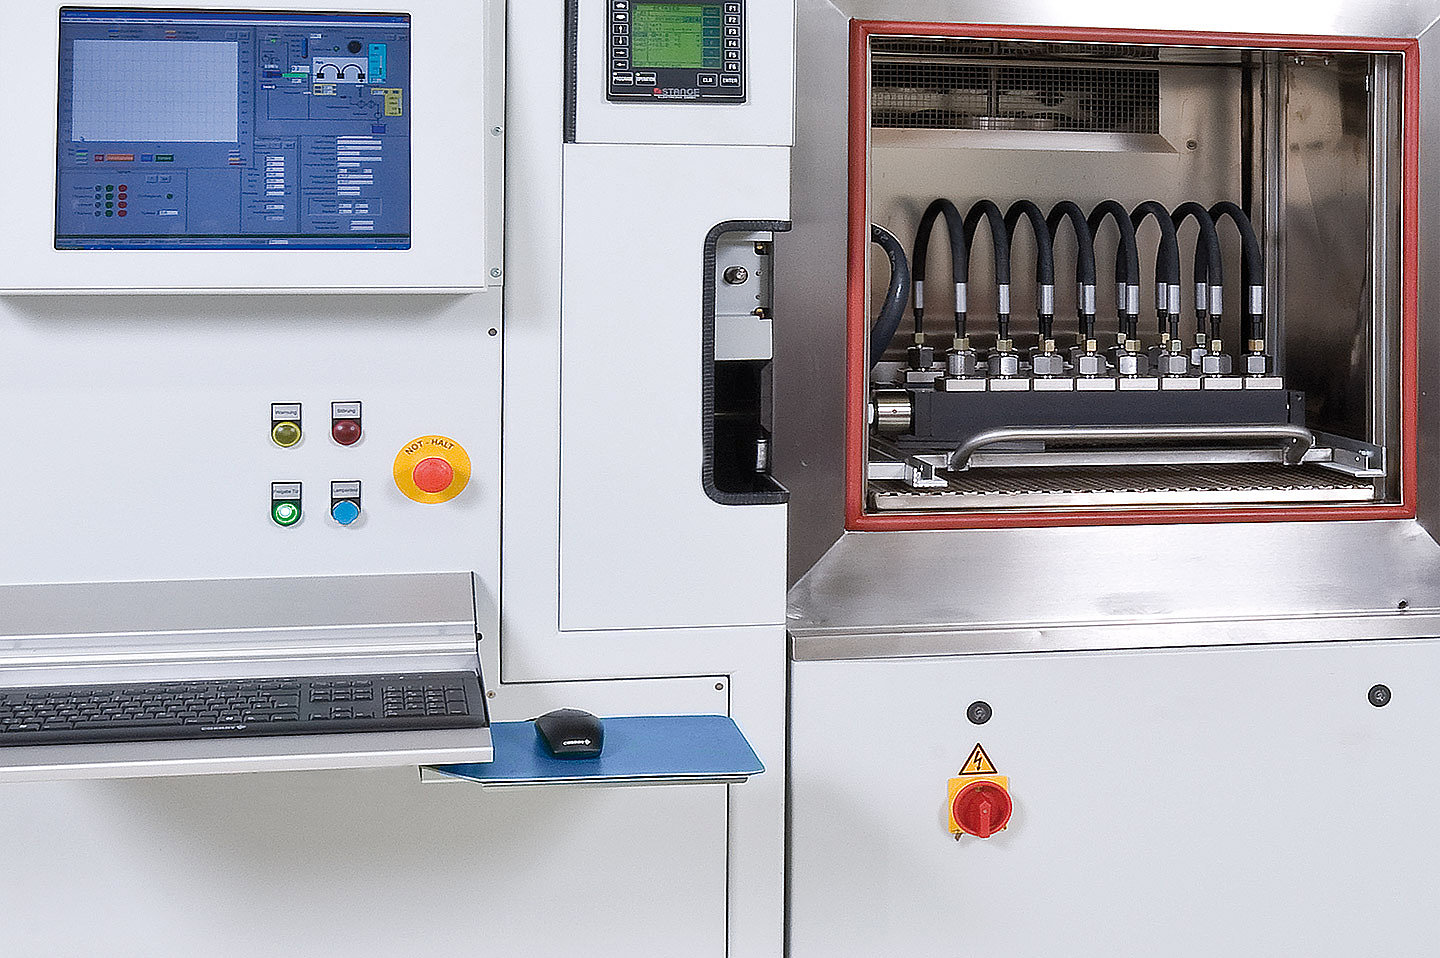 Hydraulic test stand from Blum-Novotest for impulse testing MT series